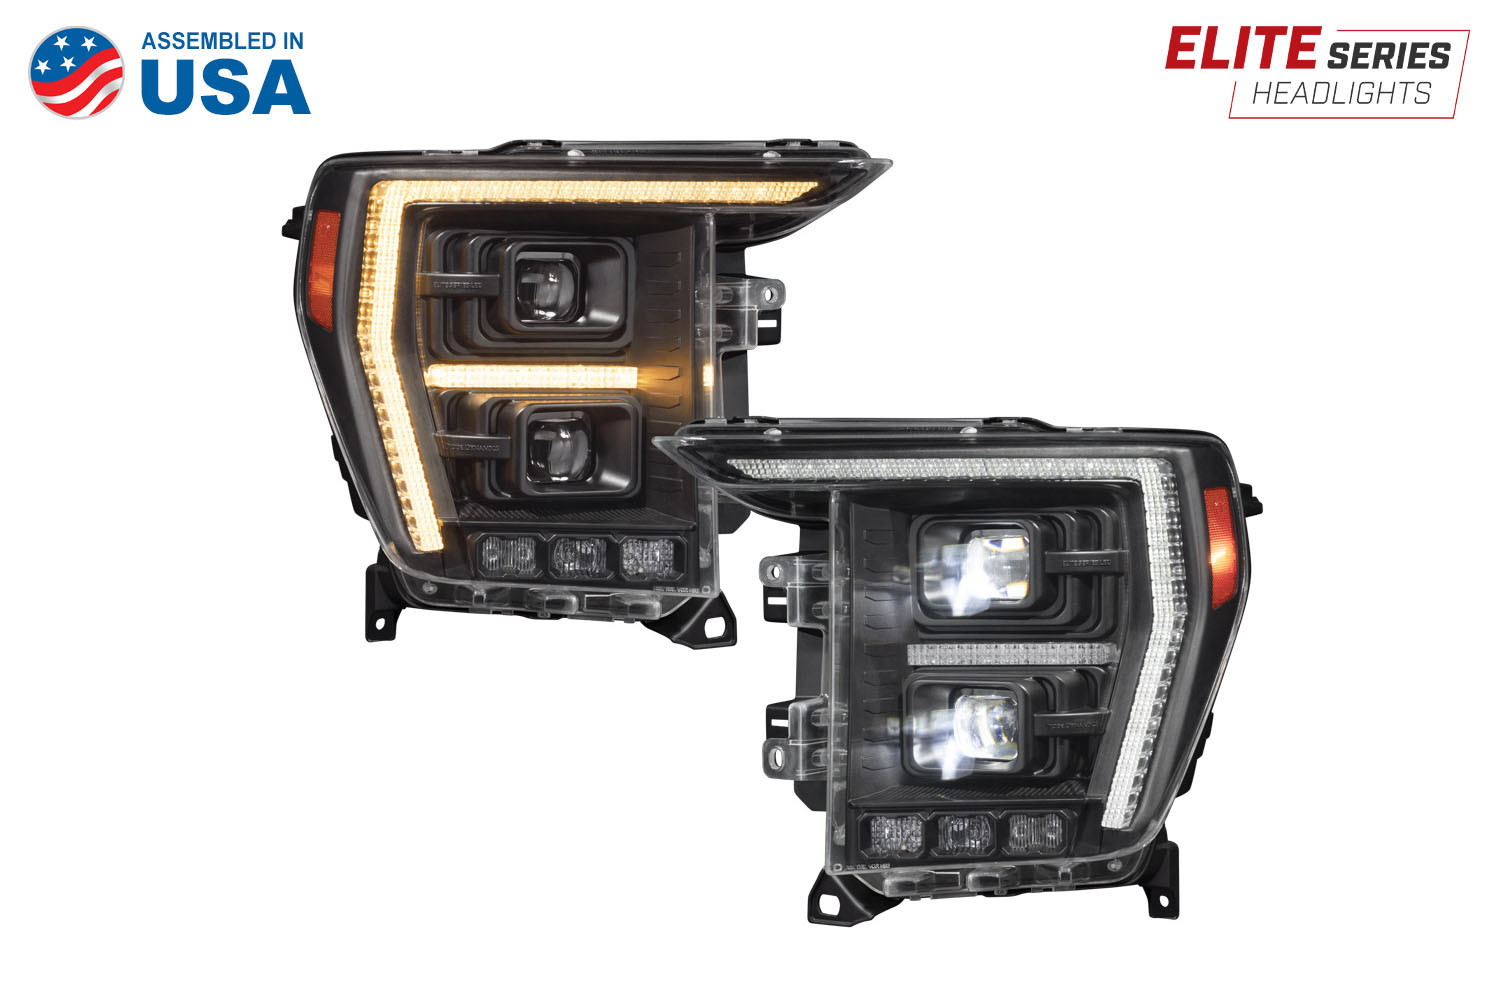 Elite Series Ford F-150 LED Headlights assembled in USA